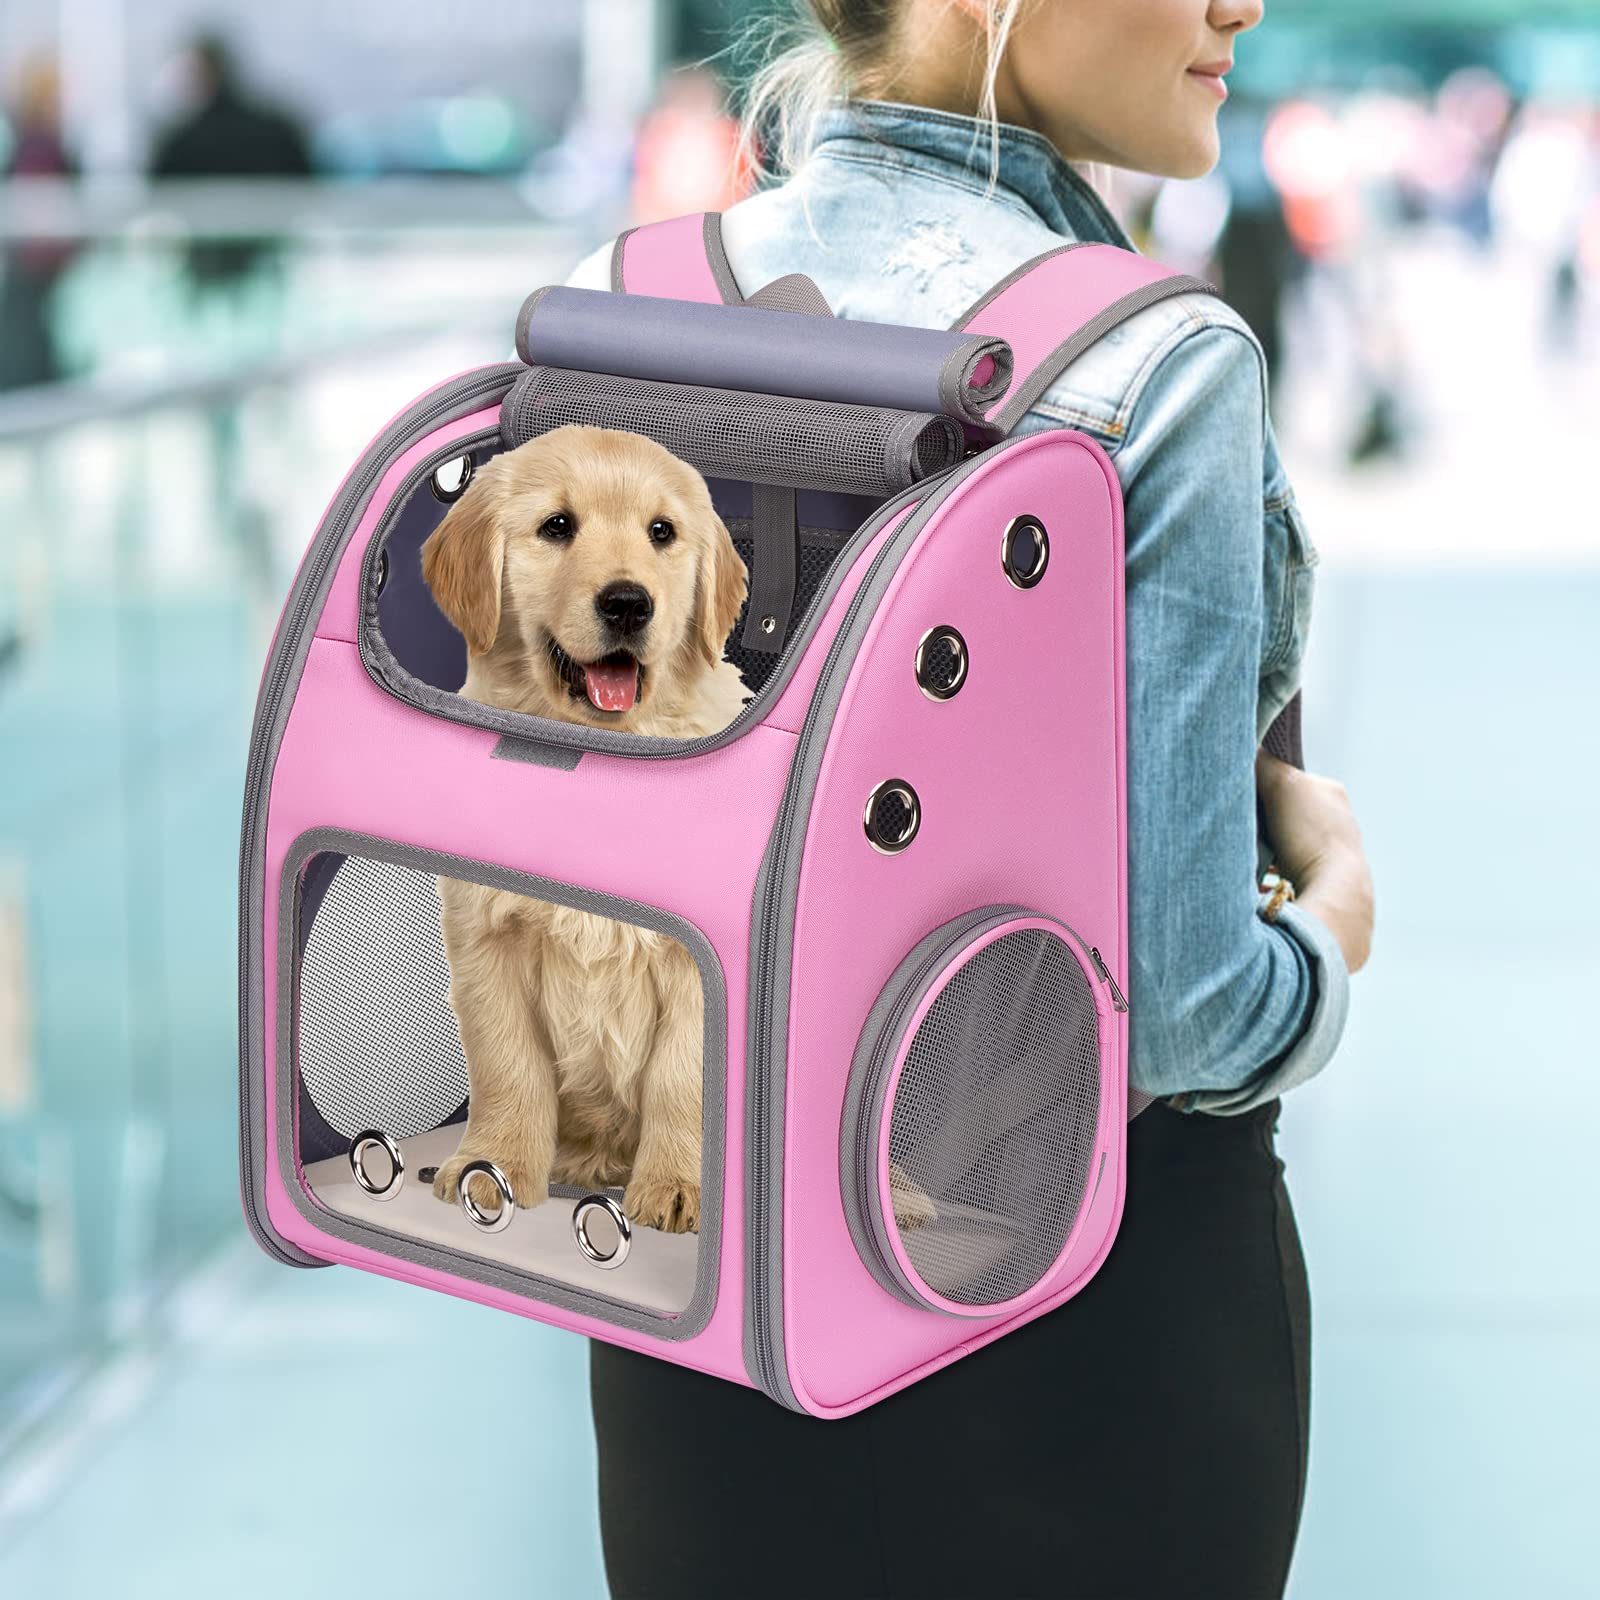 COVONO Expandable Pet Carrier Backpack for Cats, Dogs and Small Animals, Portable Pet Travel Carrier, Super Ventilated Design, Airline Approved, Ideal for Traveling/Hiking /Camping